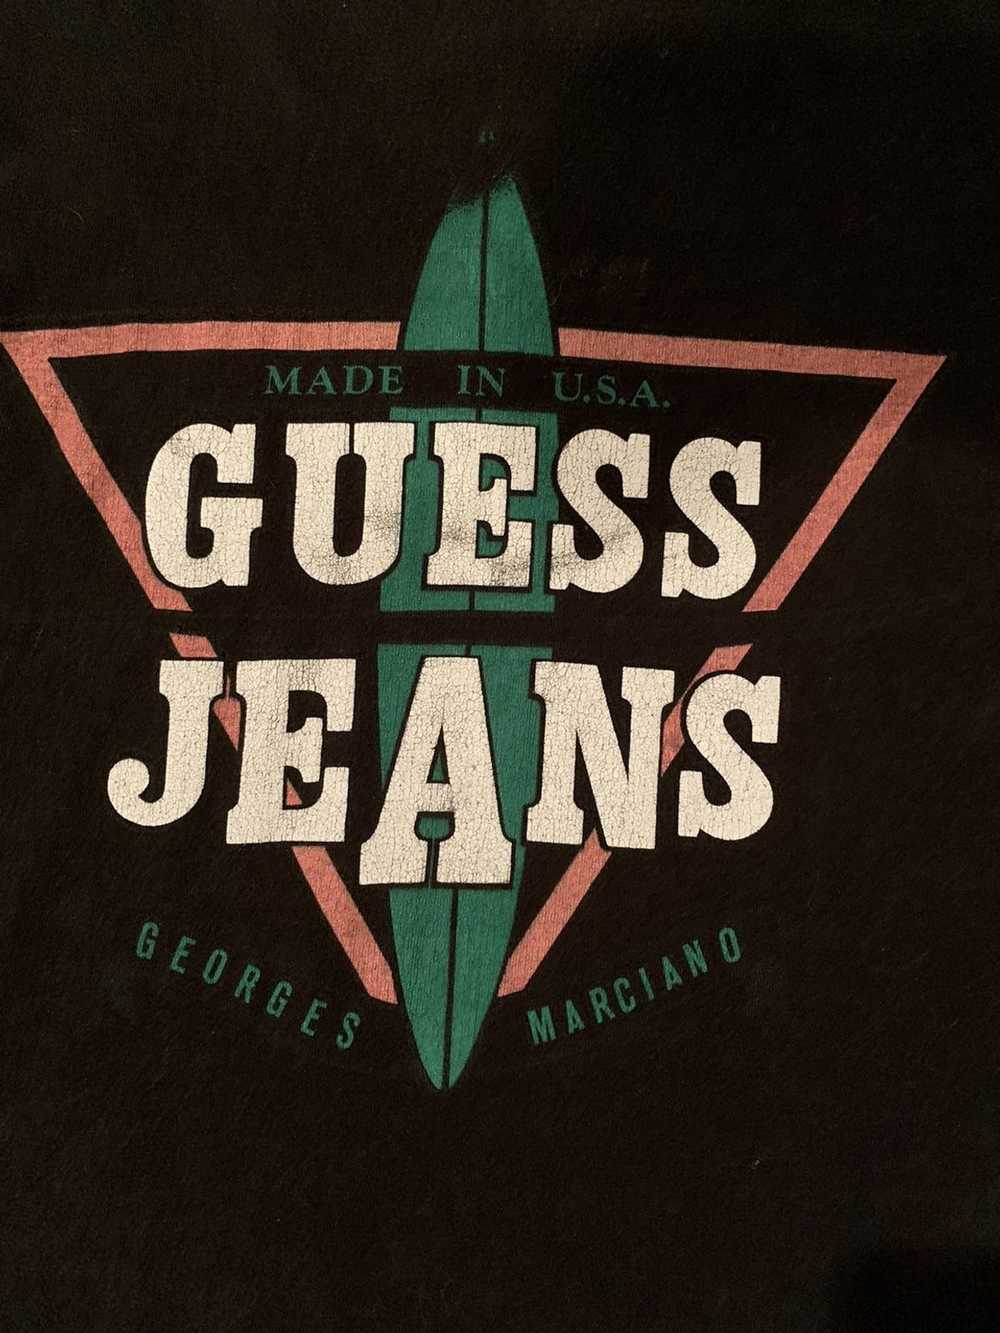 Guess Guess jeans tee - image 2